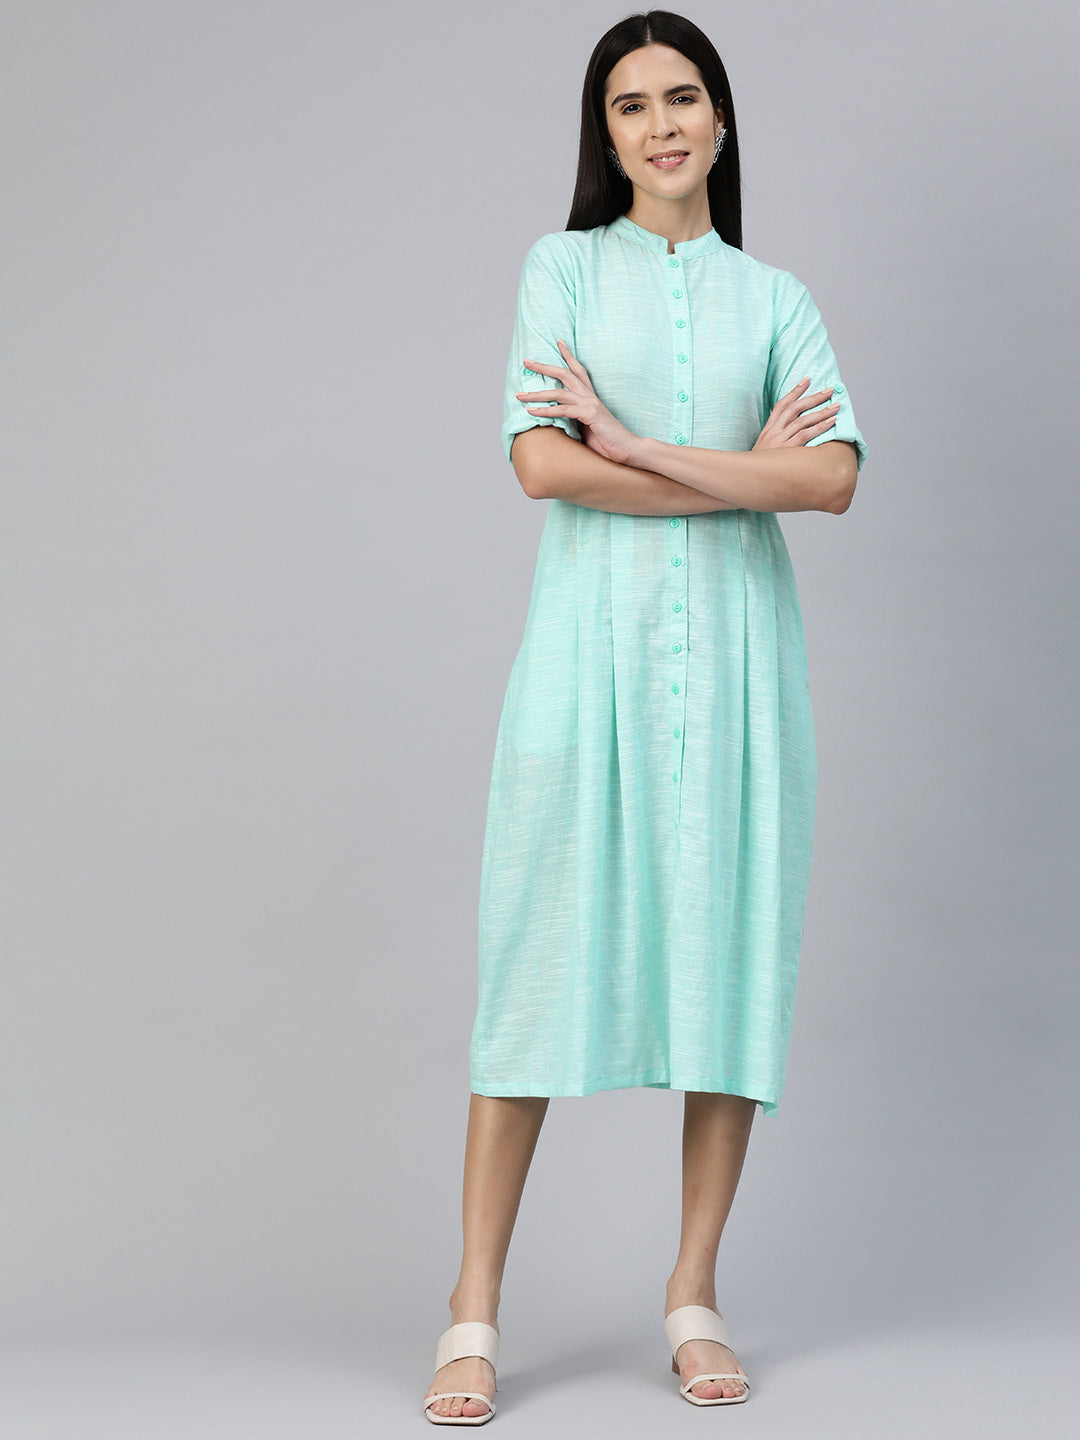 Collared Pleated Light Green Dress